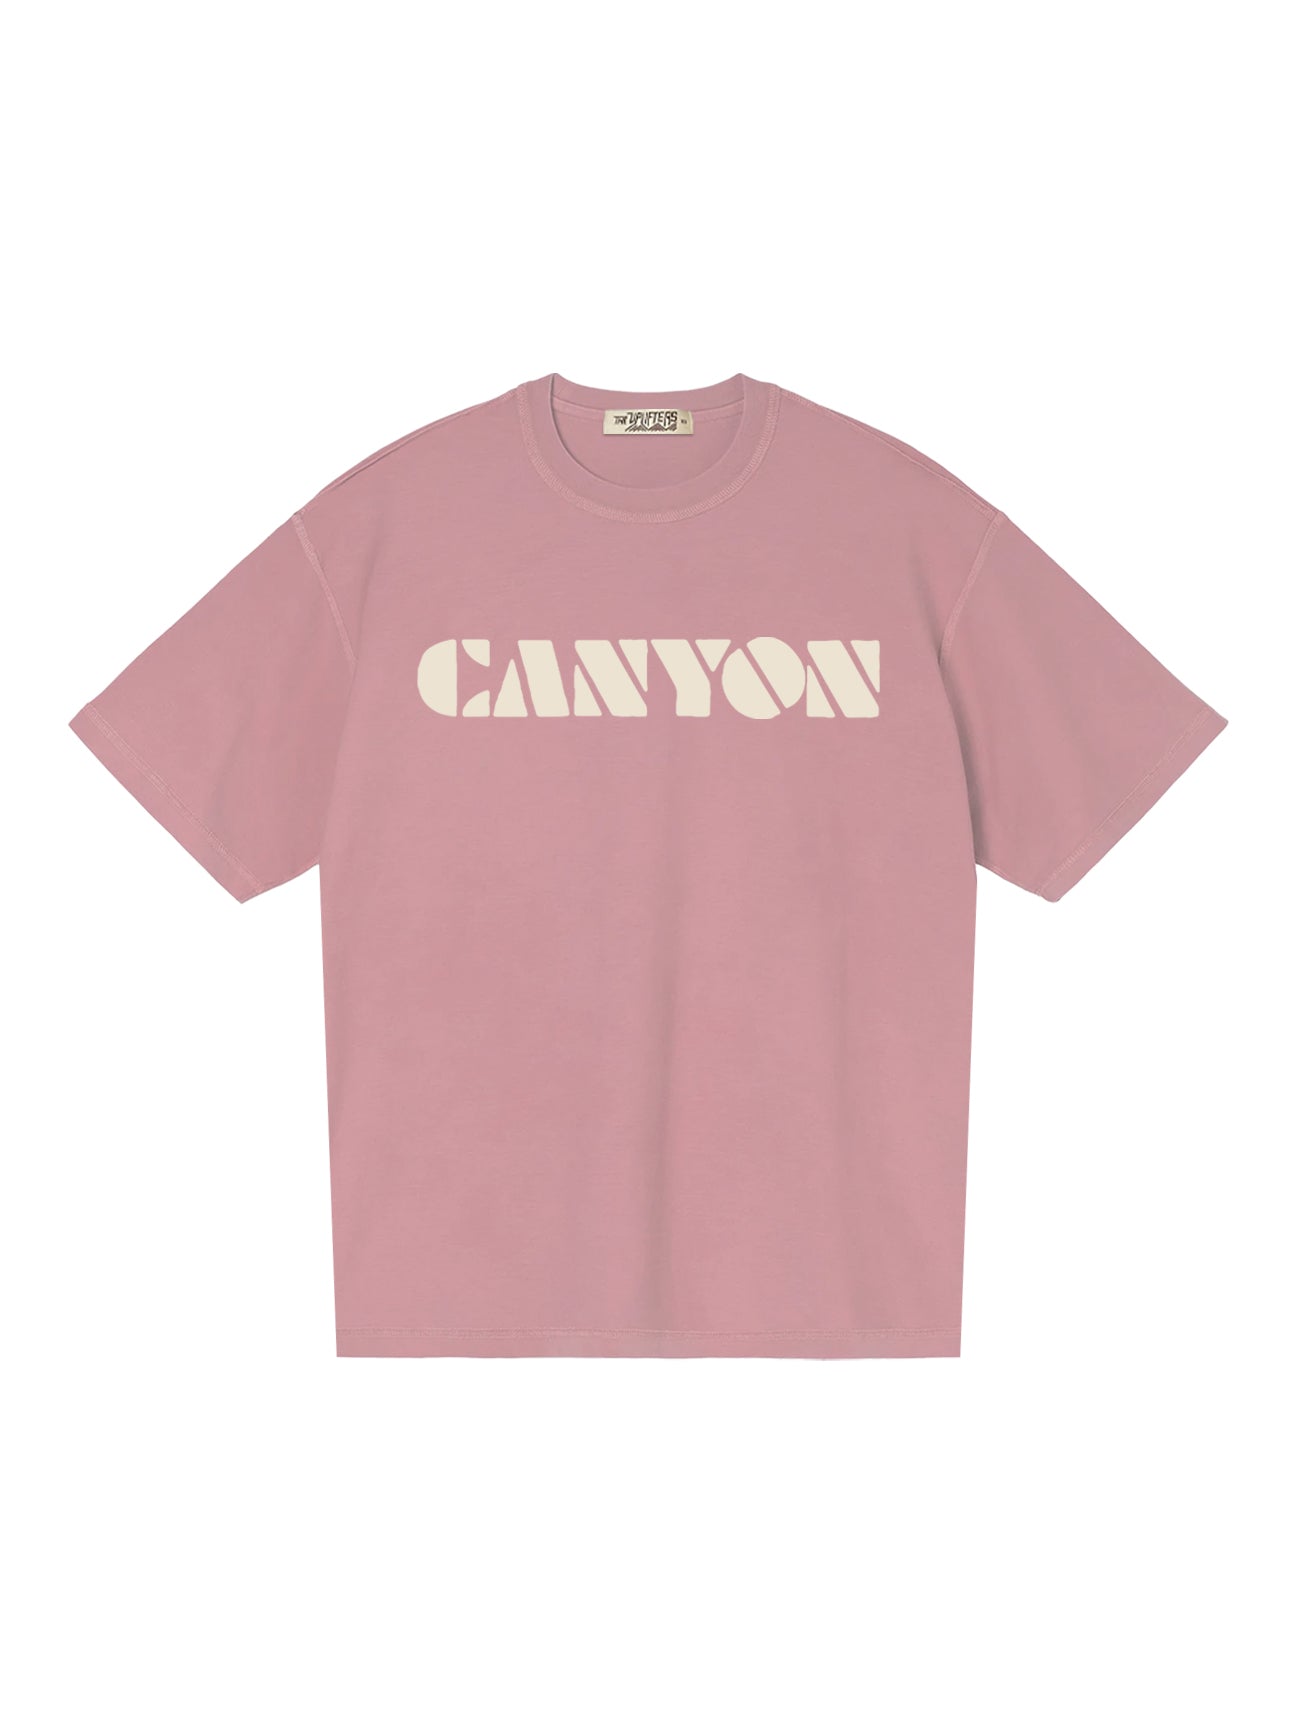 Canyon Youth Tee in Dusty Rose